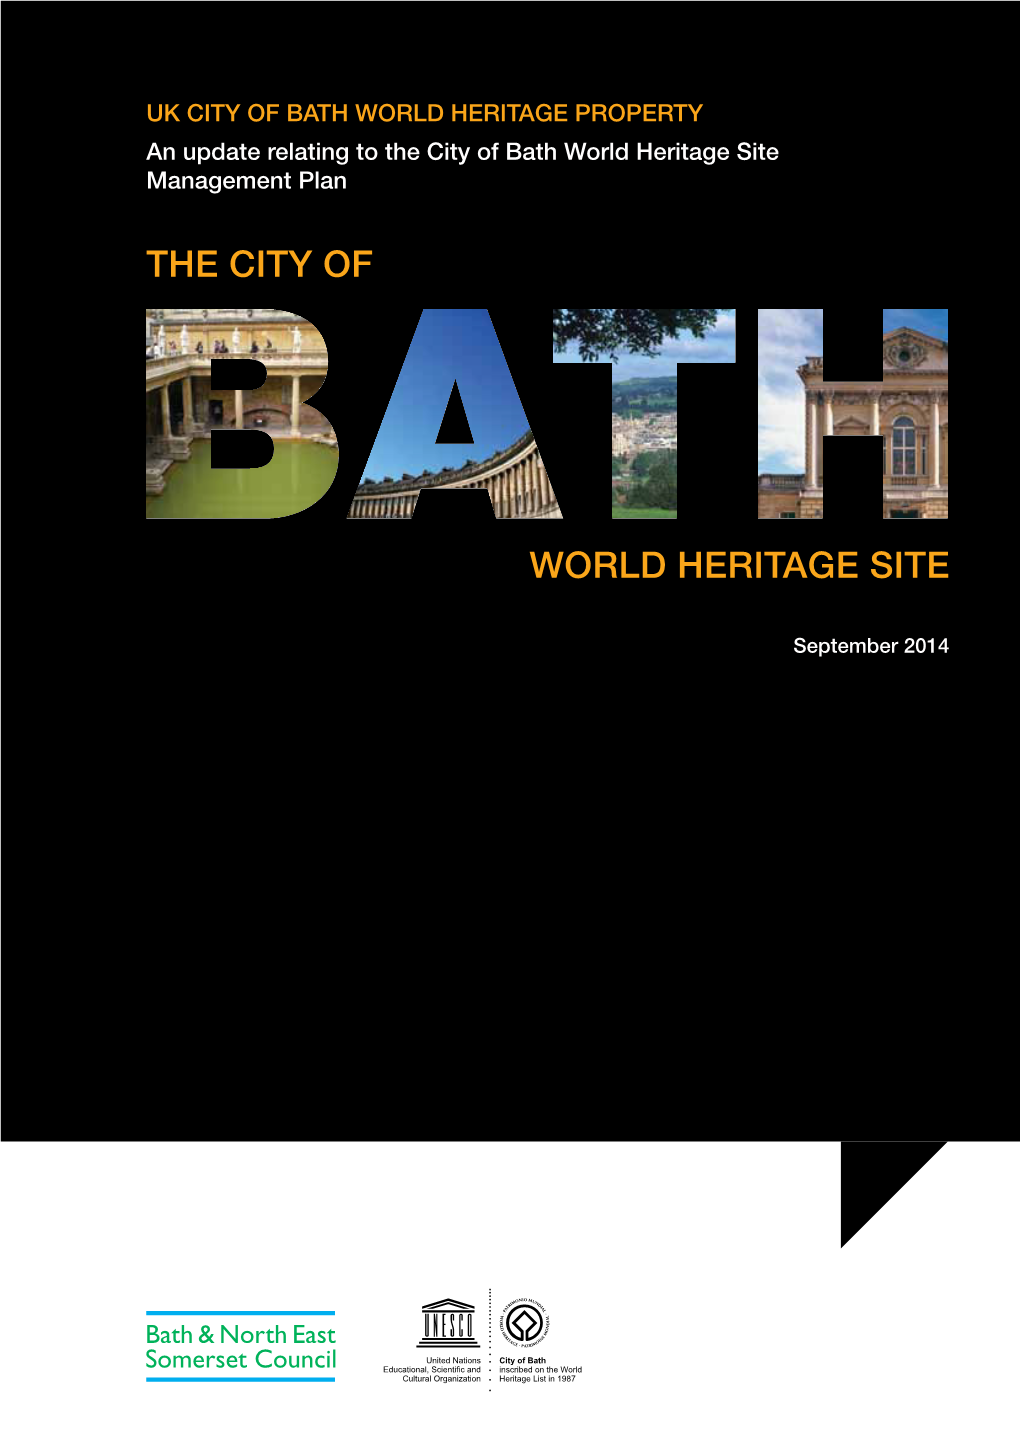 Download the 2014 Update to the City of Bath World Heritage